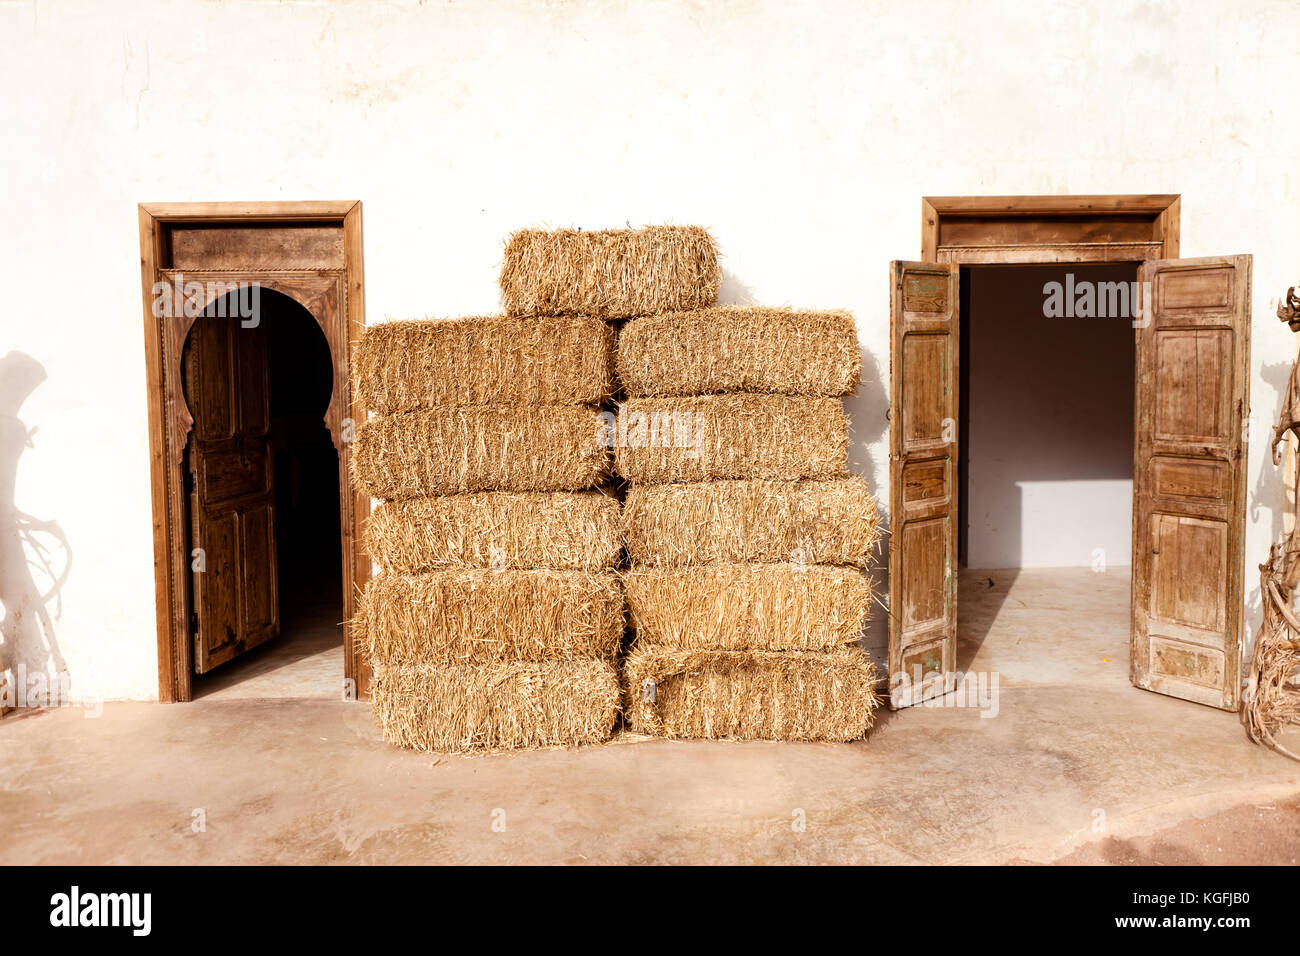 Old authentic Moroccan home with straw bales next wall Stock Photo